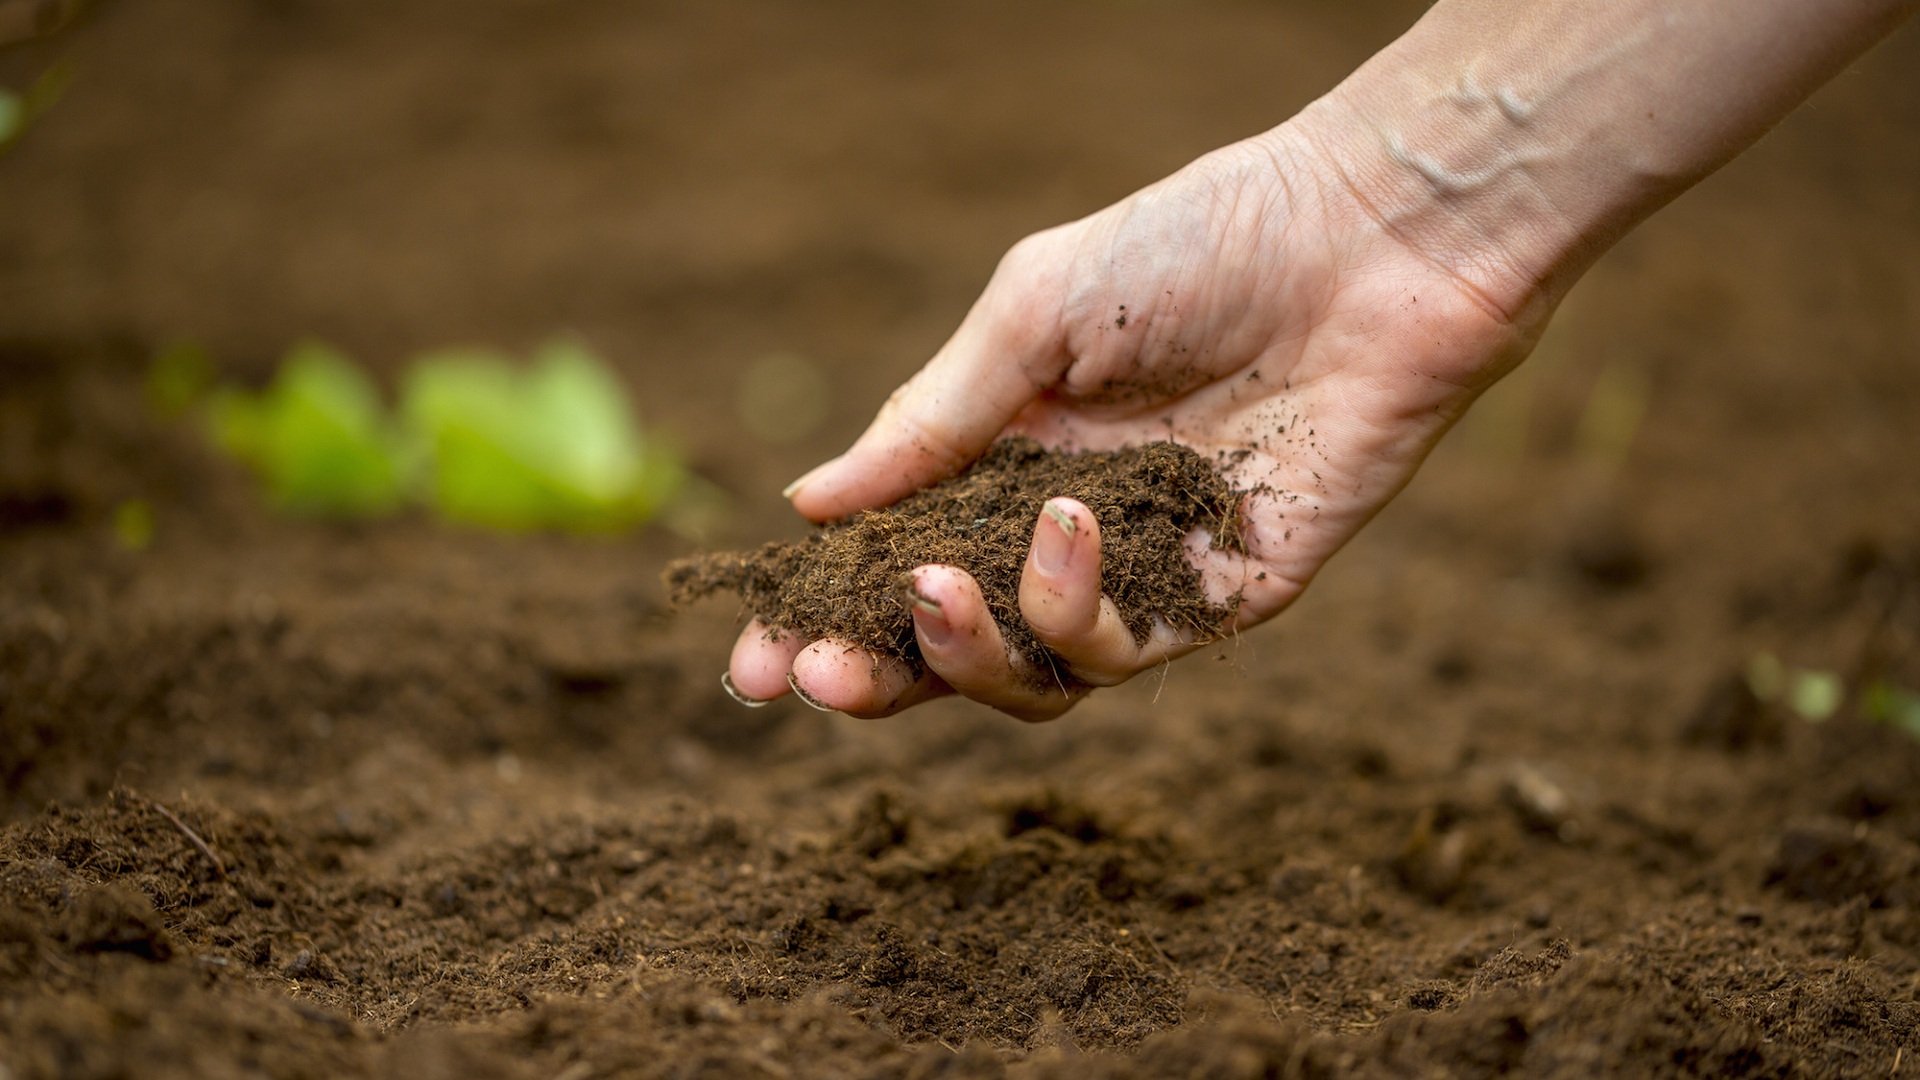 How to Soften Hard Soil and Grow a Better Lawn